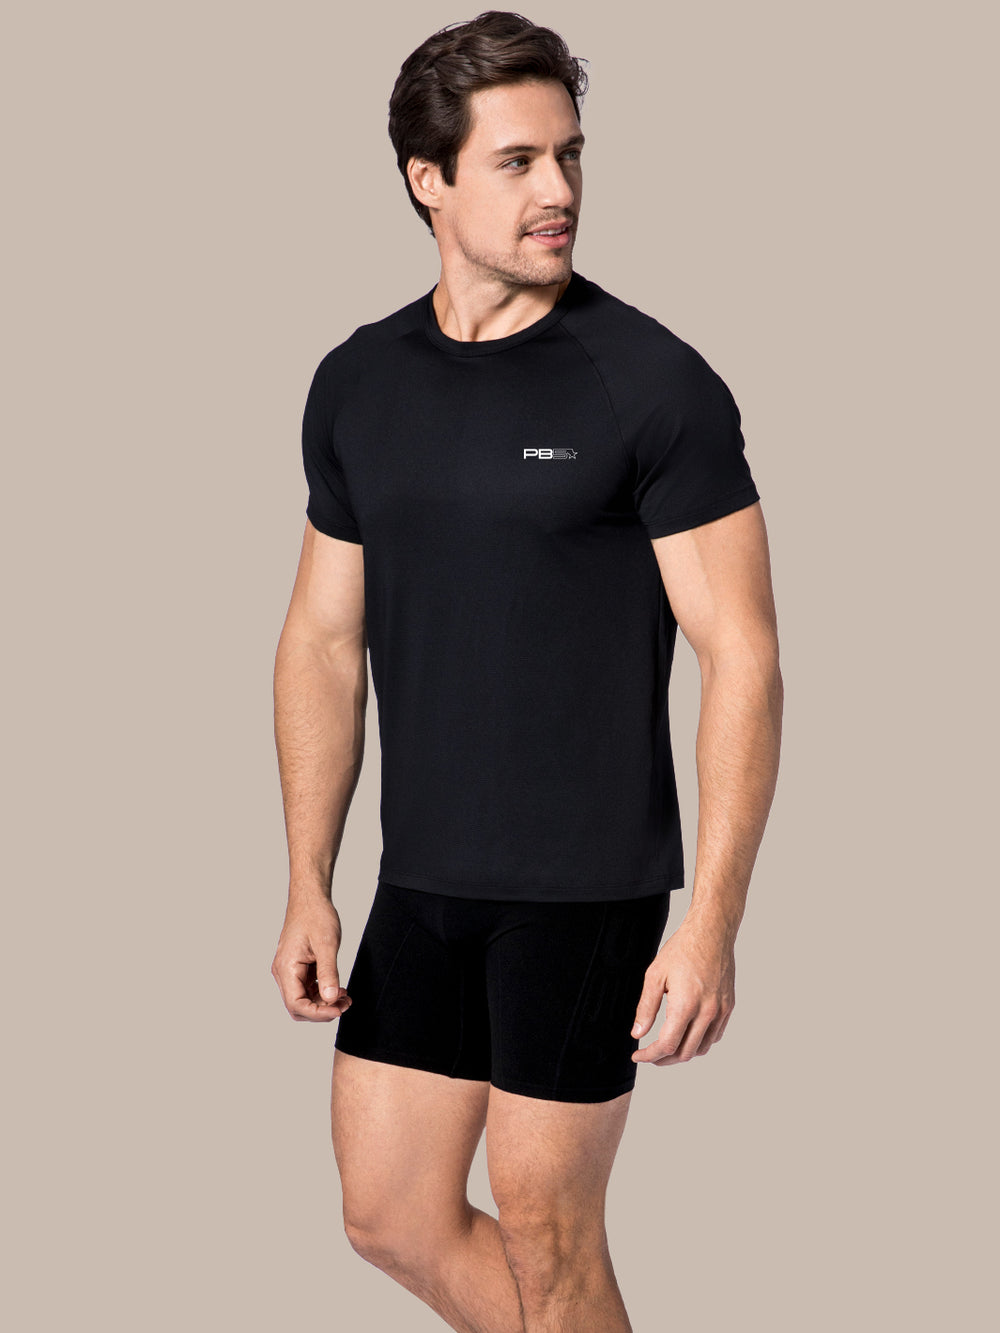 Model in men's black Compression Shorts, ideal for pickleball agility and comfort.